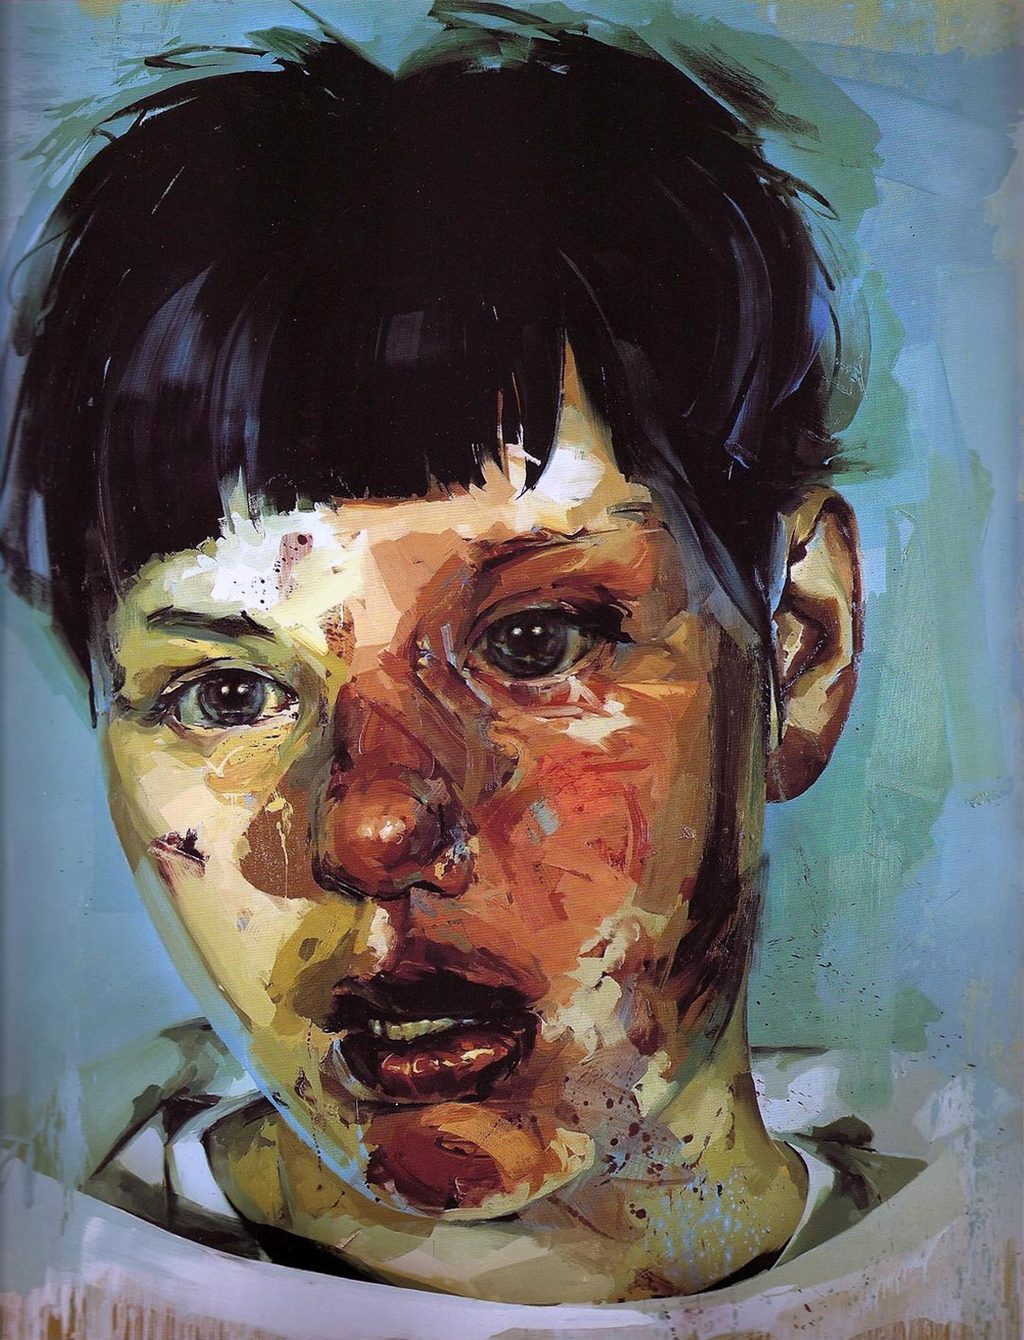 Jenny Saville, Red Stare Head IV, 2006-2011, Oil on canvas